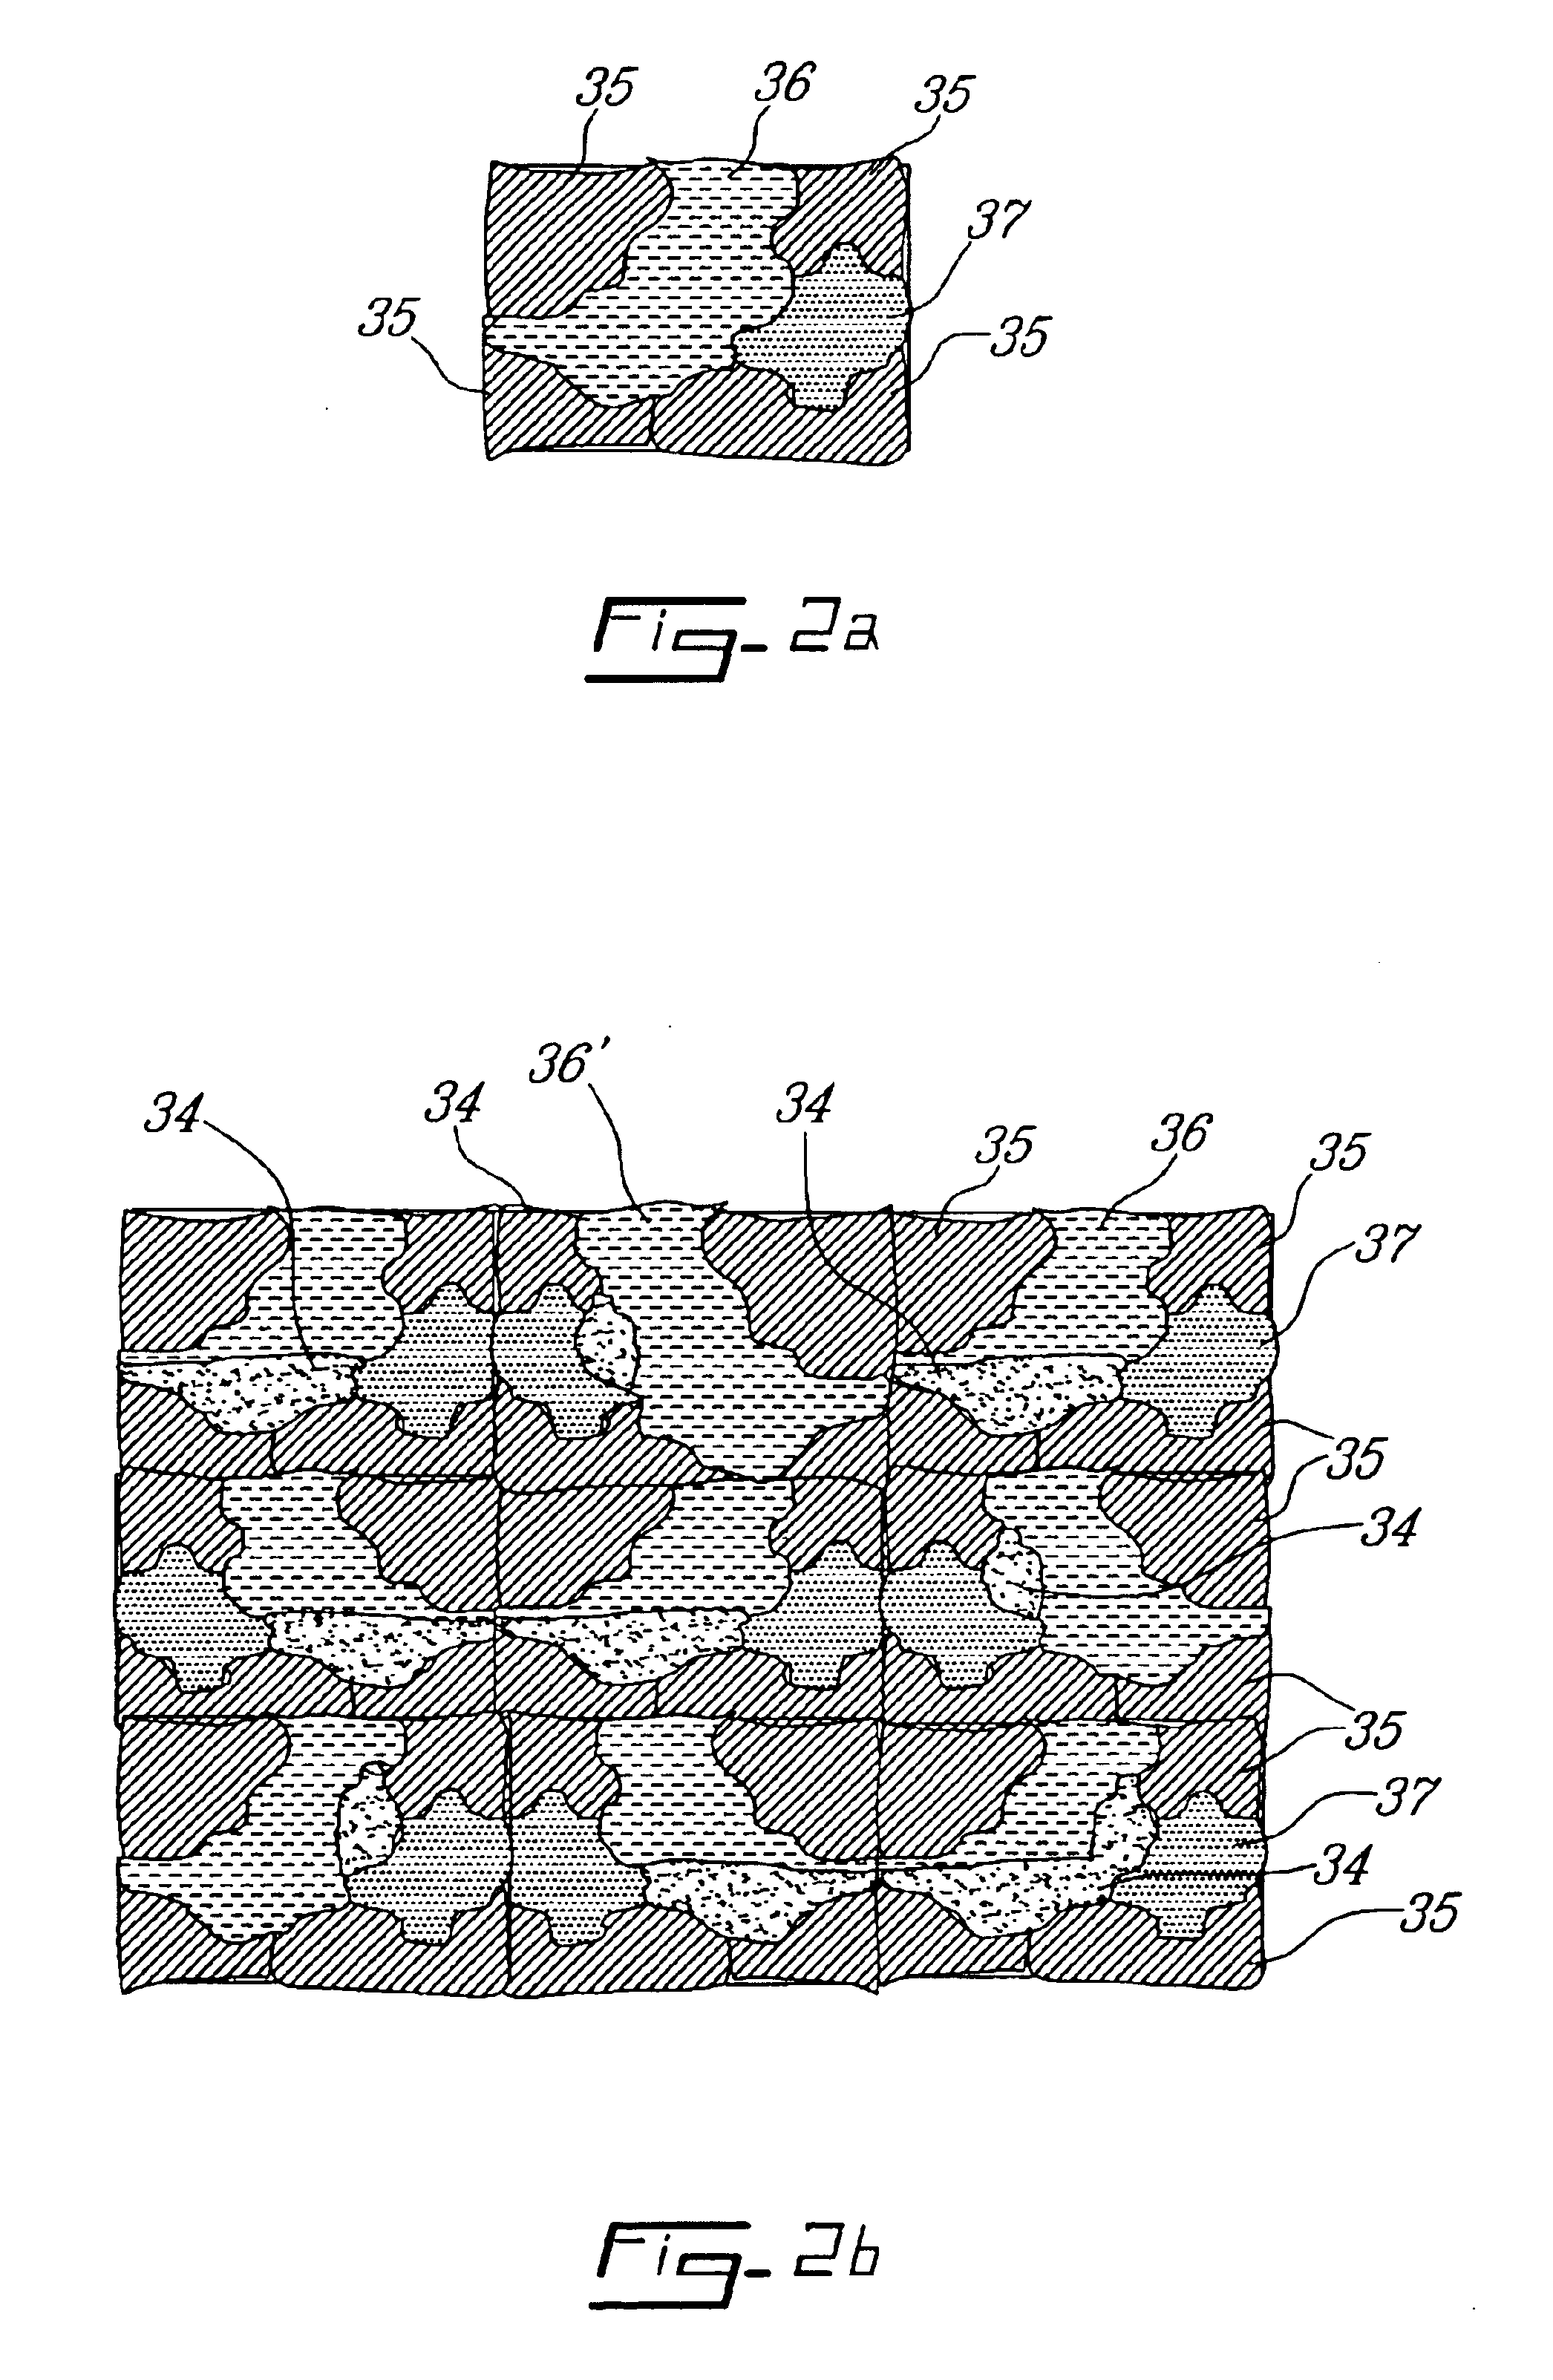 Method for modeling the transport of ions in hydrated cement systems